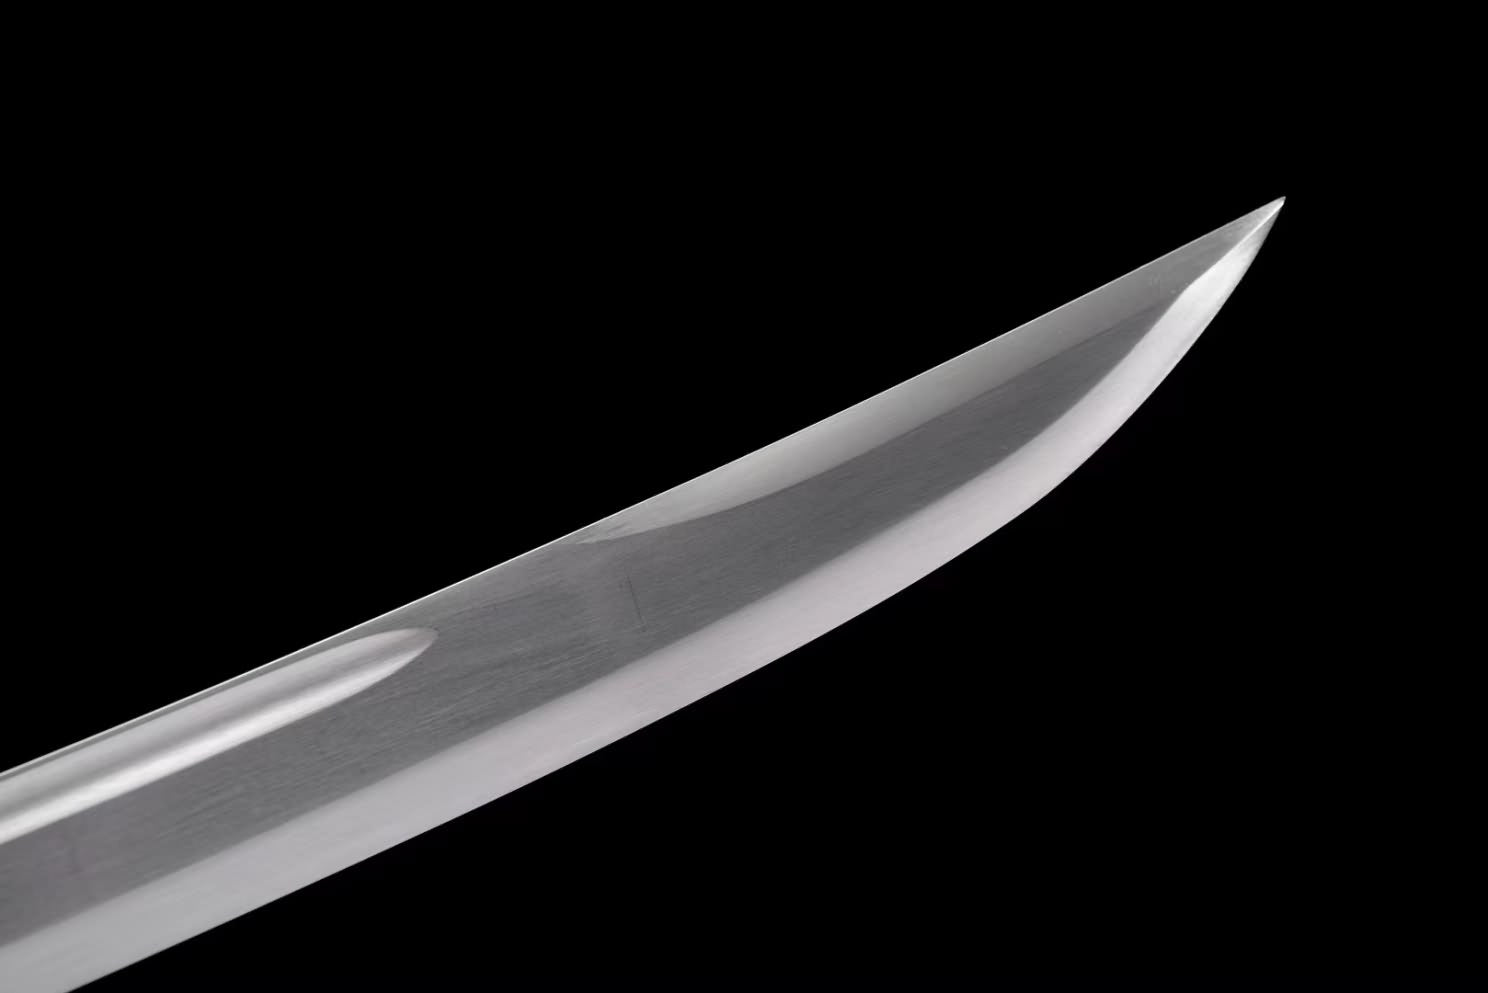 Hand-Forged Chinese Swords - Authentic Dao and Broadsword Craftsmanship | High Carbon Steel Blades with Alloy Handles